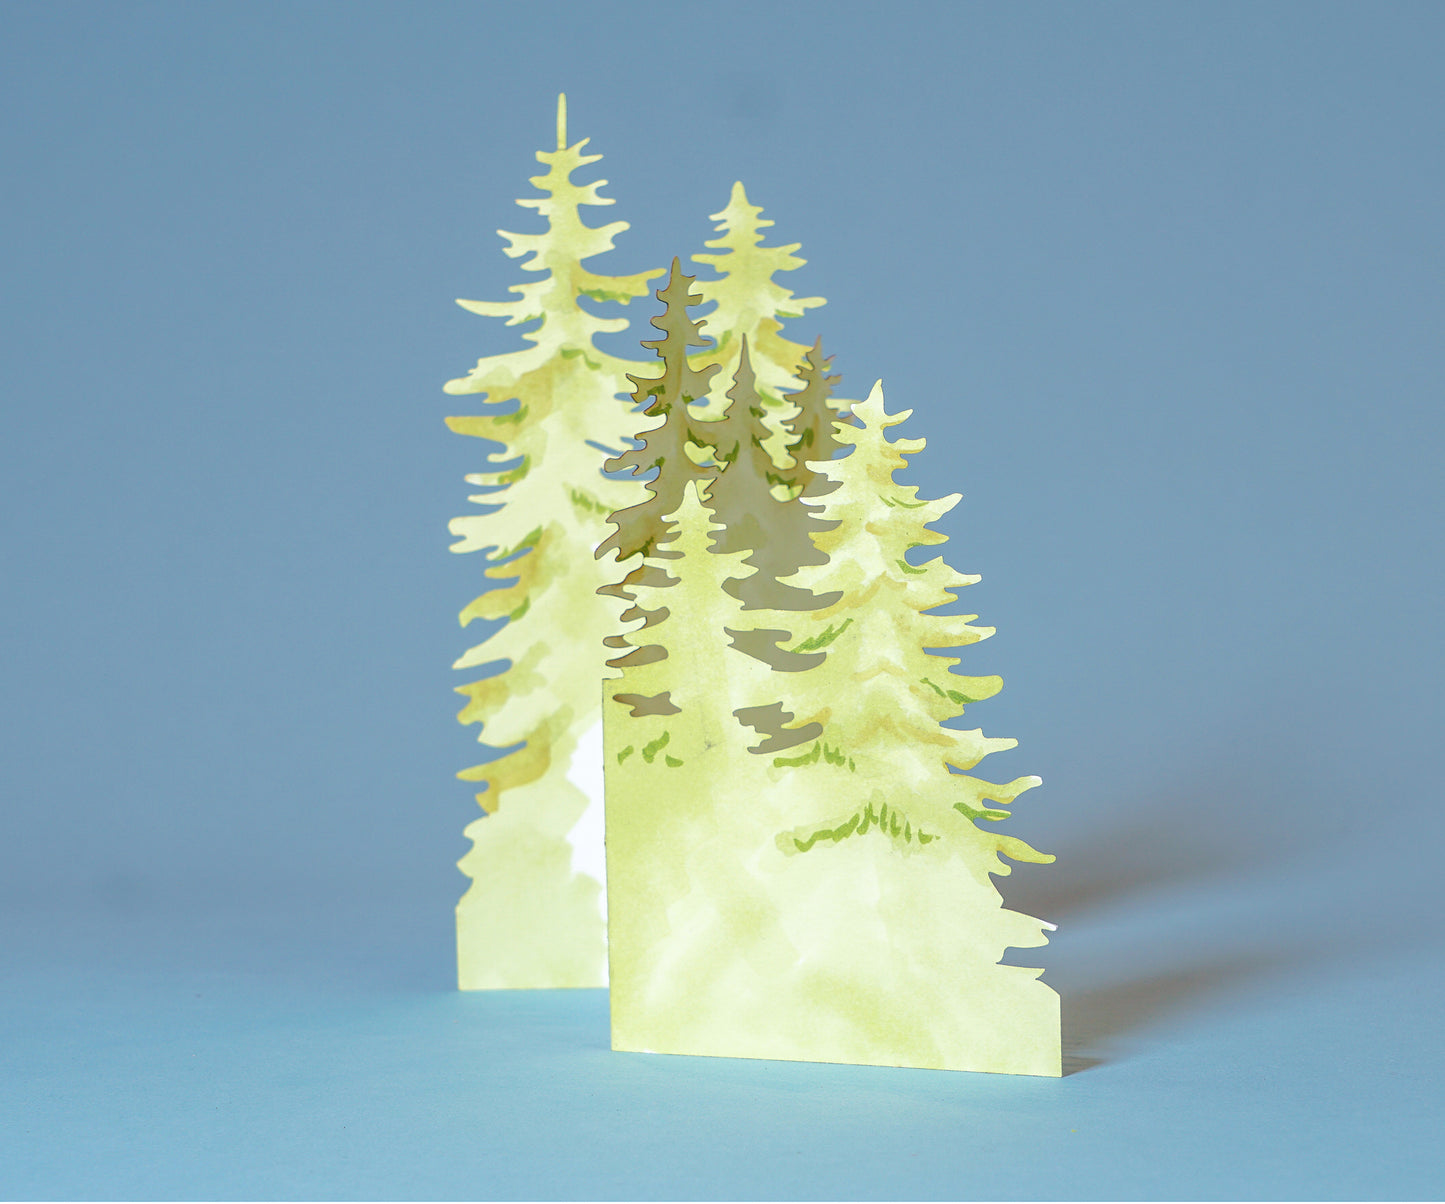 Wintery Pines Trifold Card